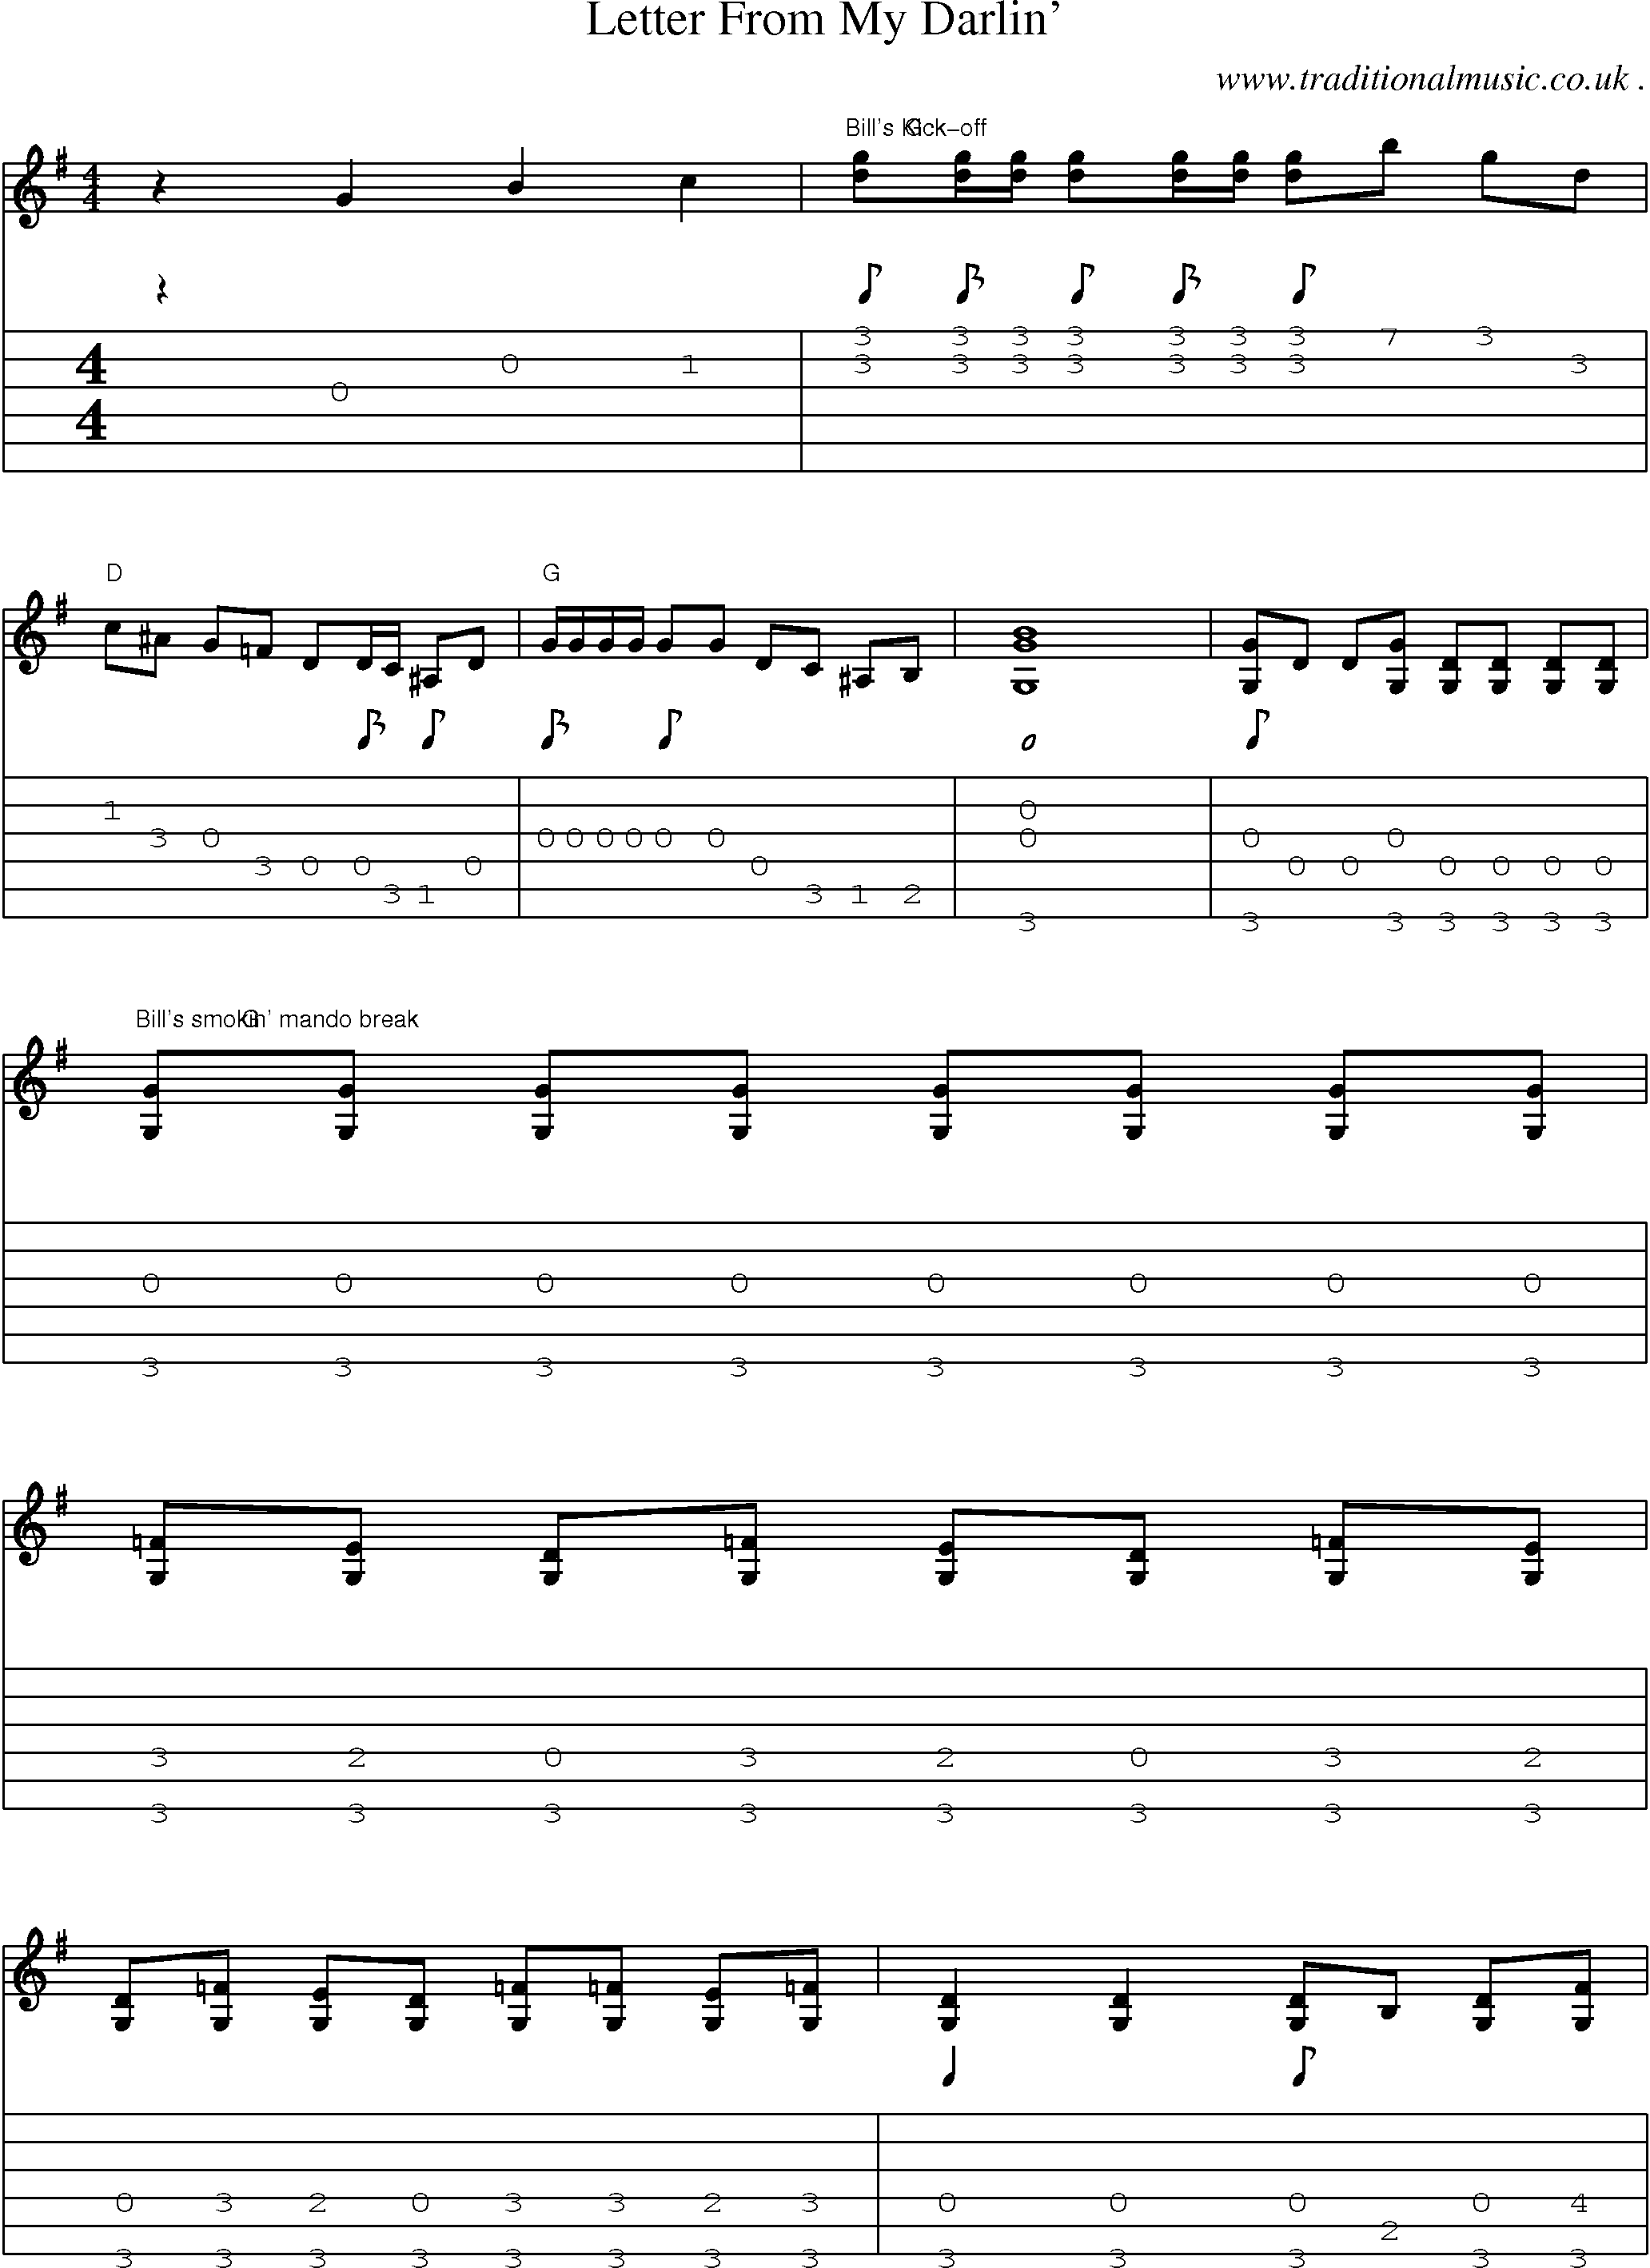 Music Score and Guitar Tabs for Letter From My Darlin